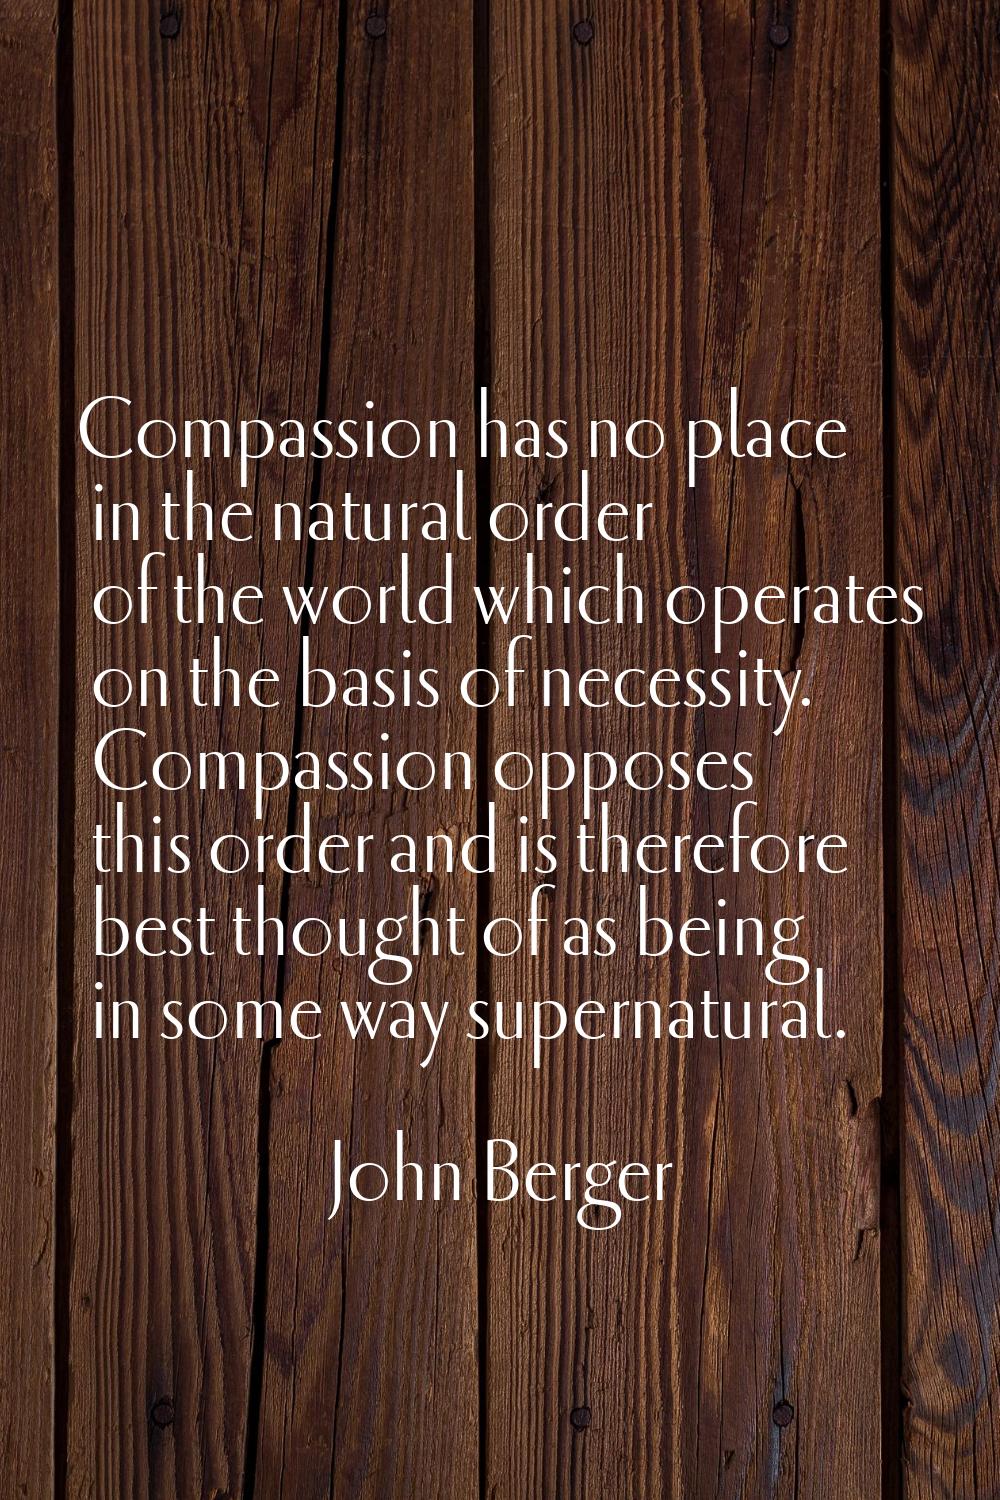 Compassion has no place in the natural order of the world which operates on the basis of necessity.